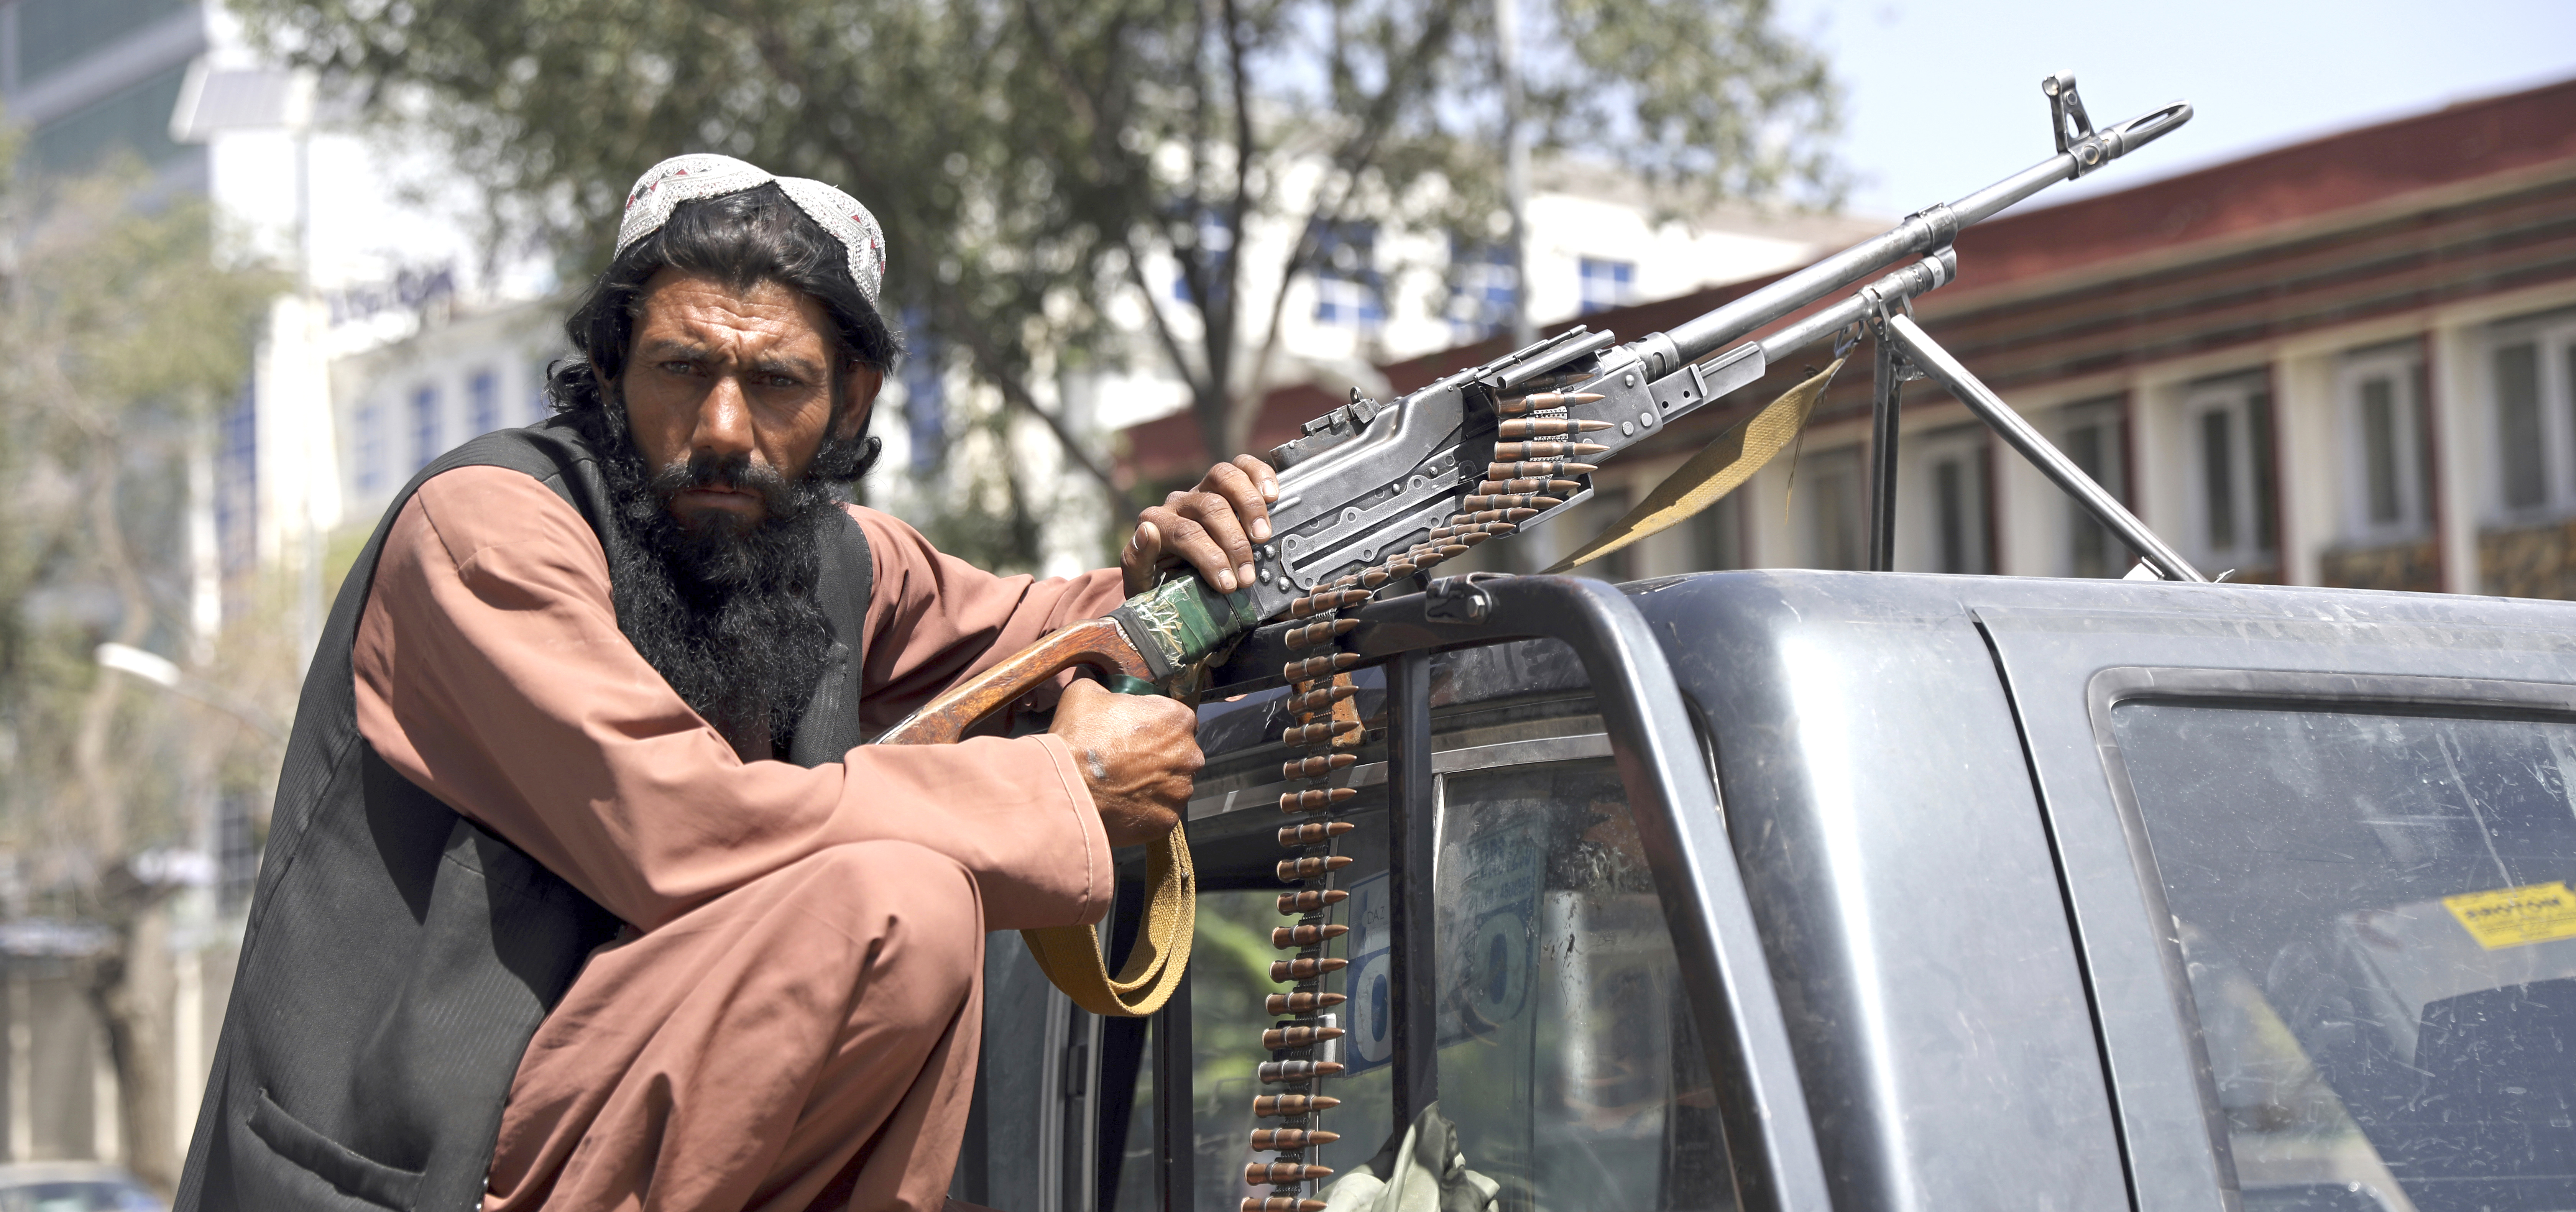 Taliban take over Afghanistan: What we know and what's next